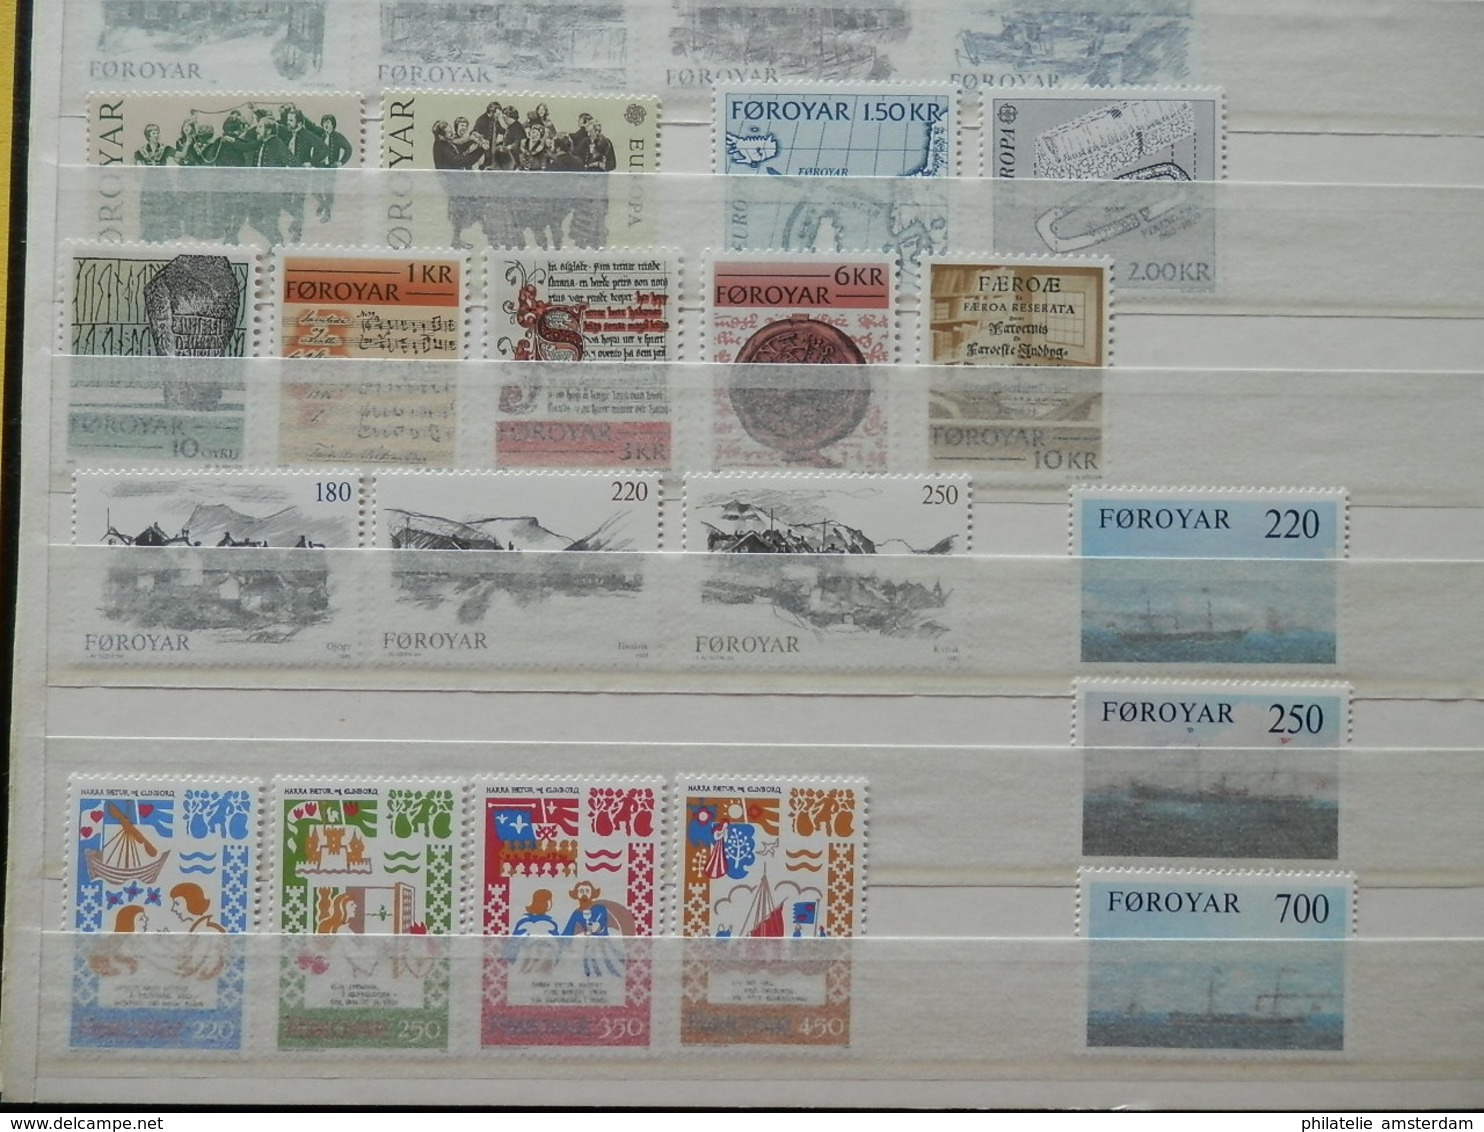 Denmark, Greenland & Faroe Islands: MNH collection in stockbook and year sets